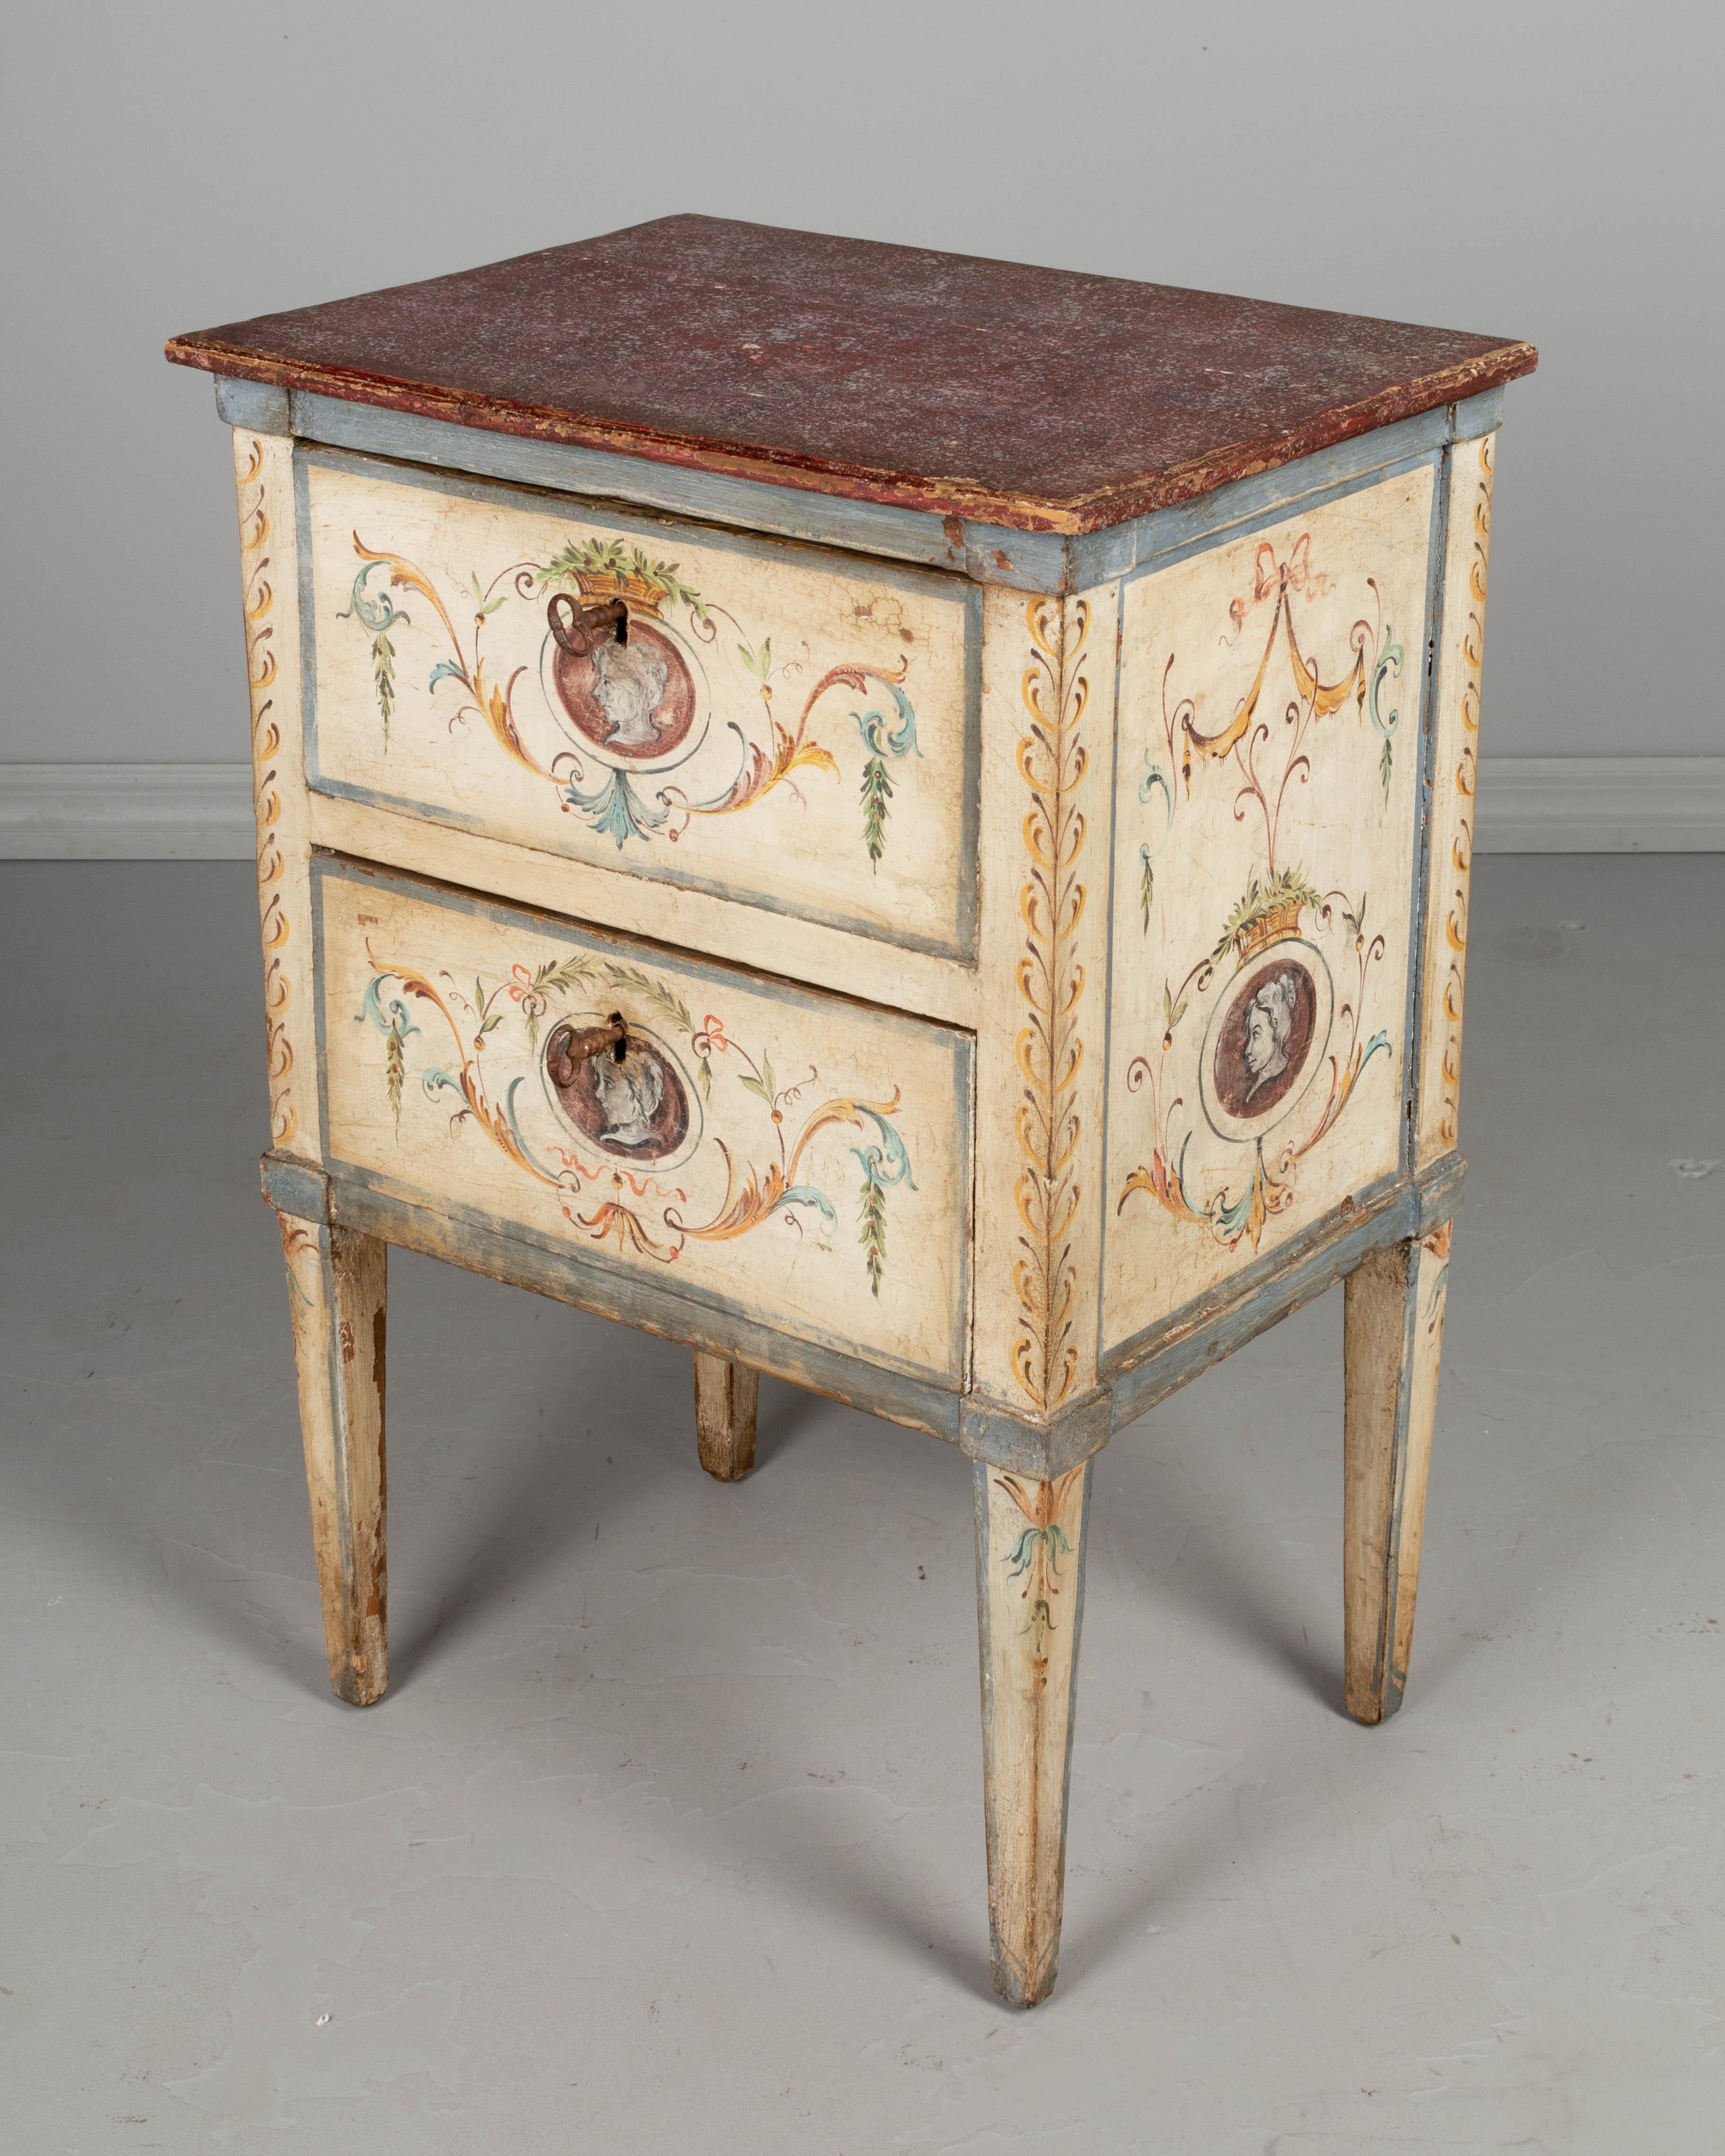 A small Italian Florentine style polychrome paint decorated chest, or nightstand. Made of pine, with two dovetailed drawers. Newer locks are in working condition with two keys. Mid-19th century case with later paint. In good condition, sturdy and